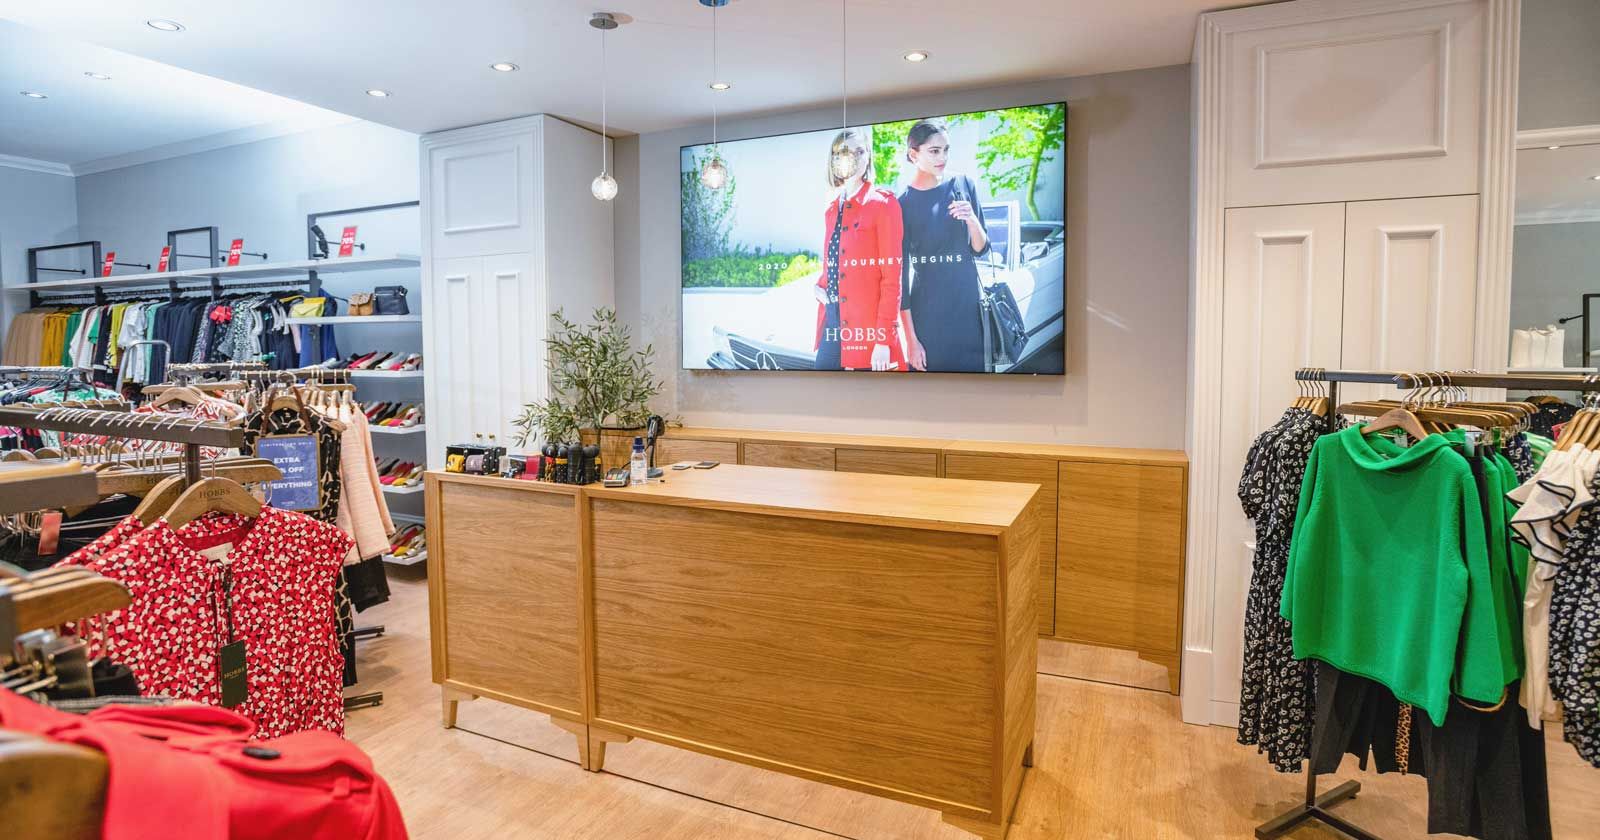 Banks-Long-And-Co-Hobbs-London-Checkout-area-Feature-Wall-Bespoke-Joinery-by-APSS